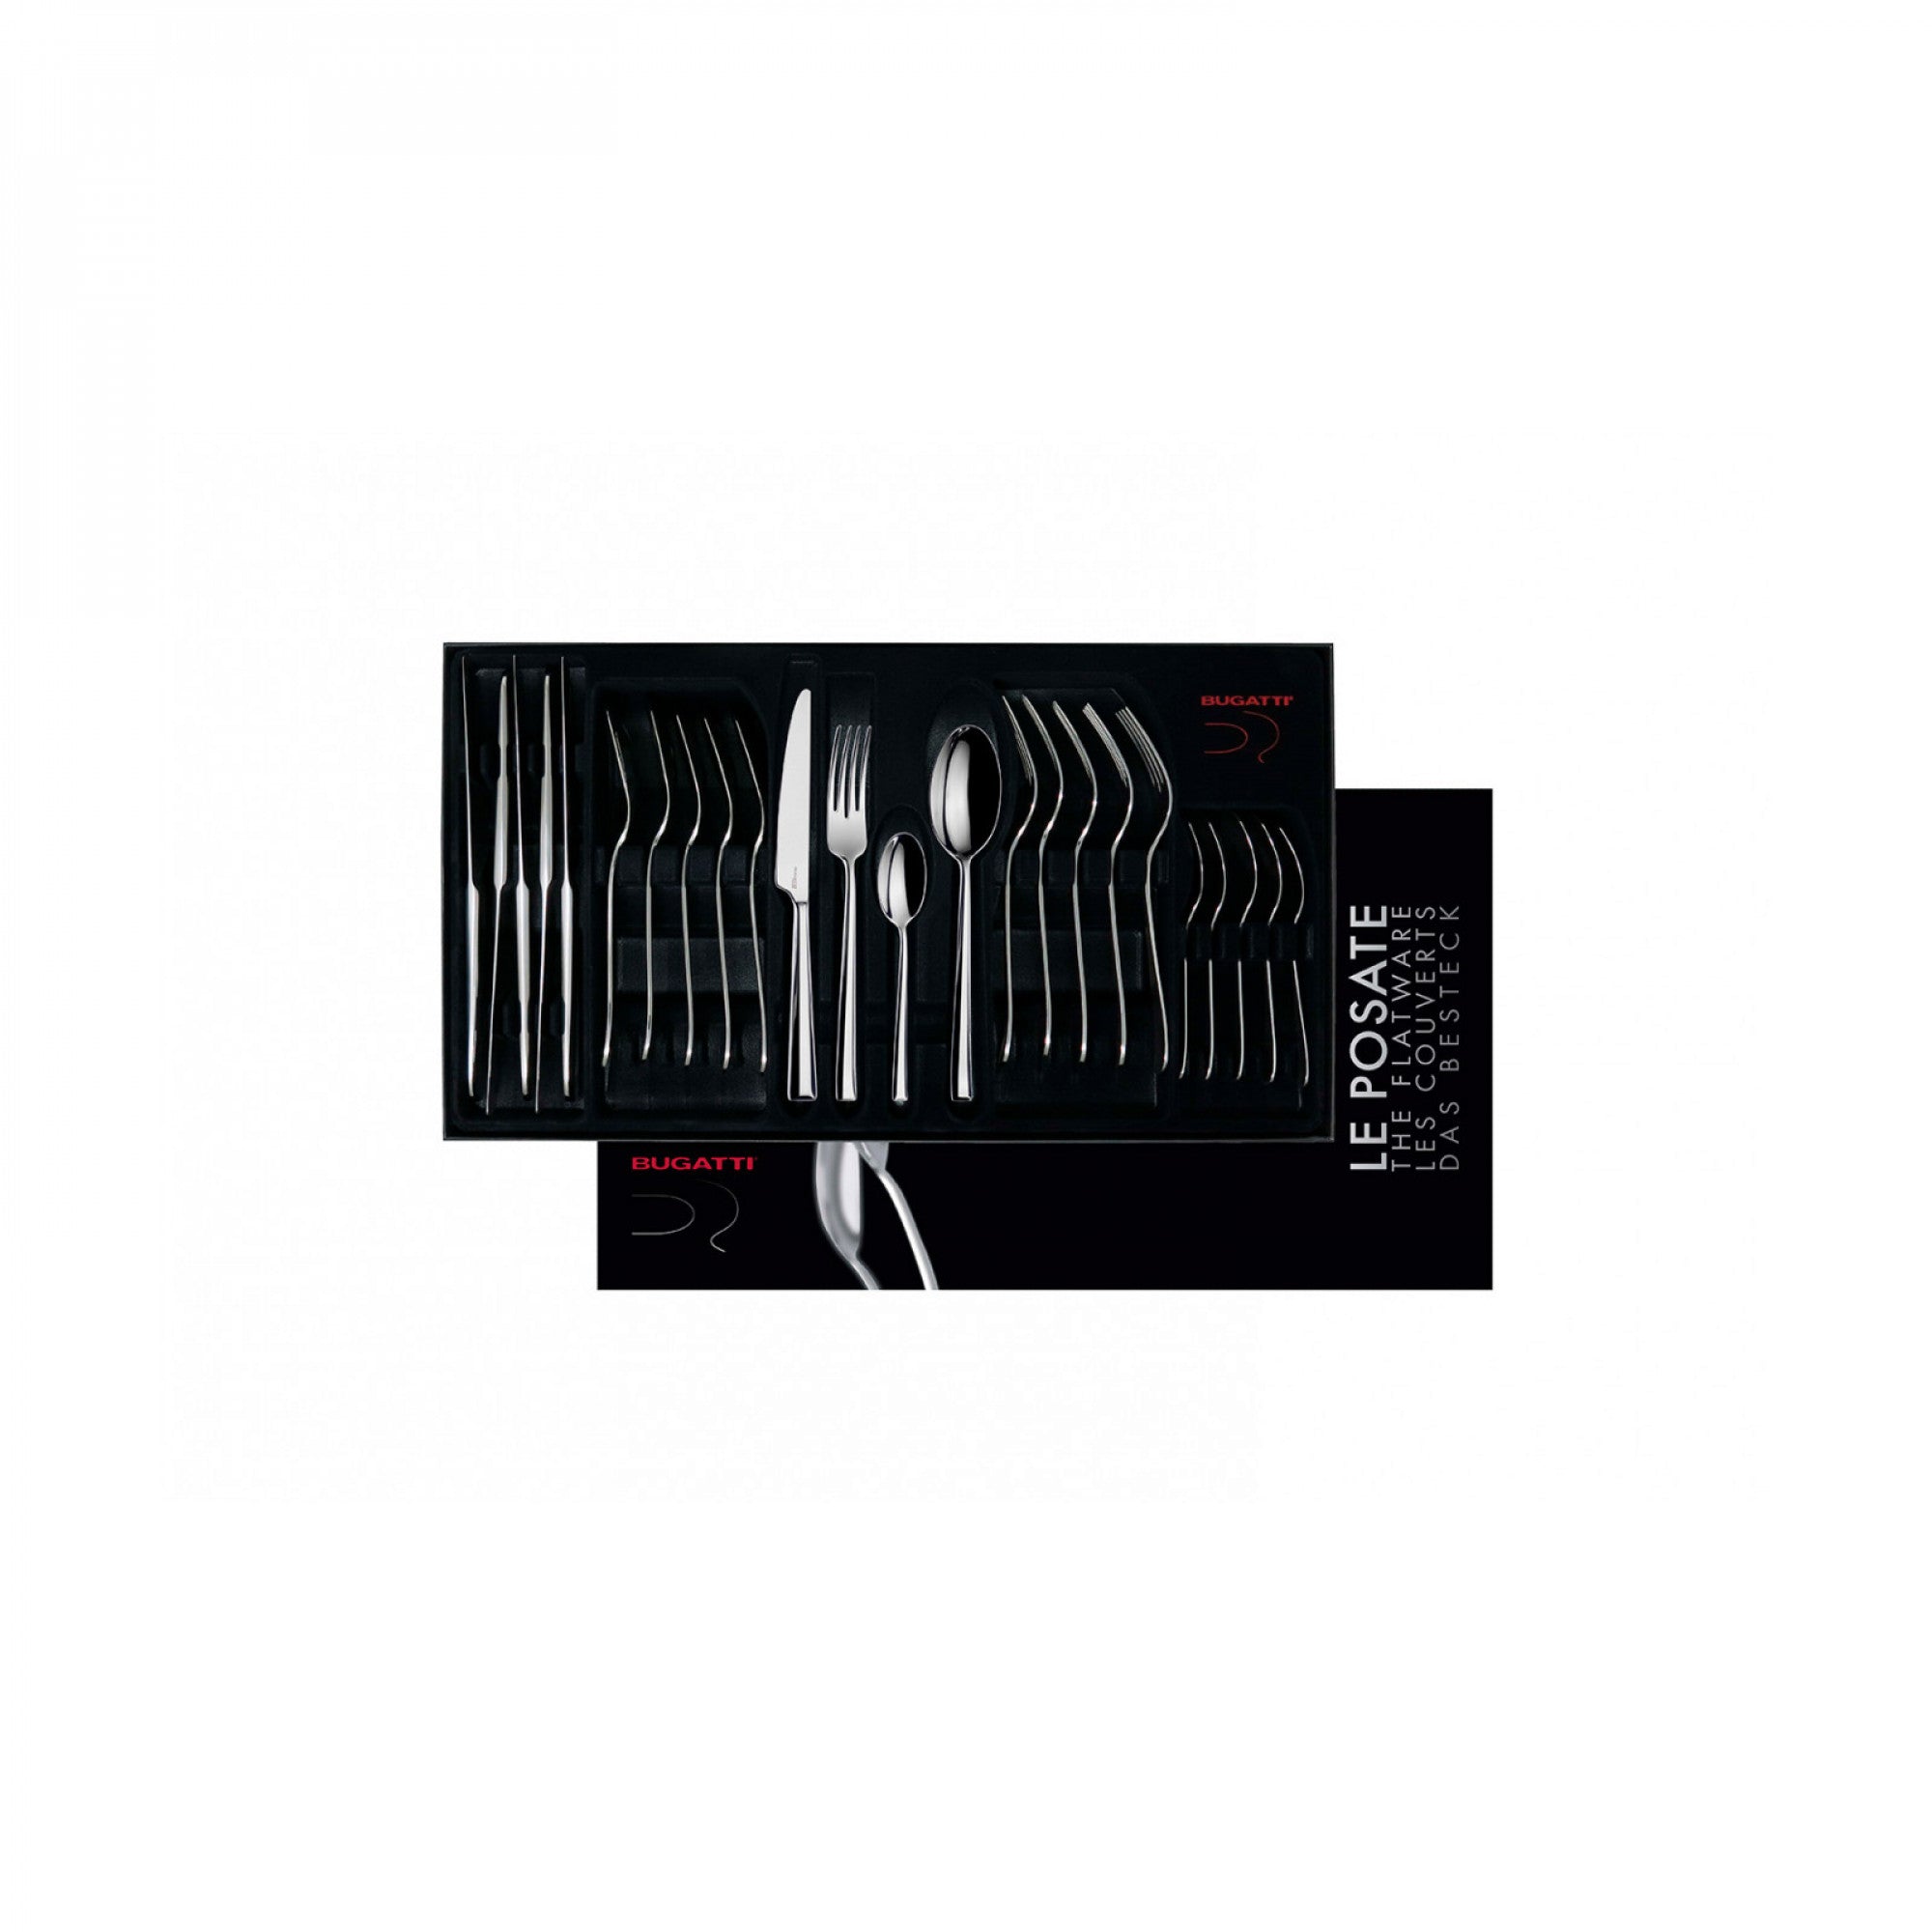 BUGATTI, Duetto, 24-piece cutlery set in 18/10 stainless steel